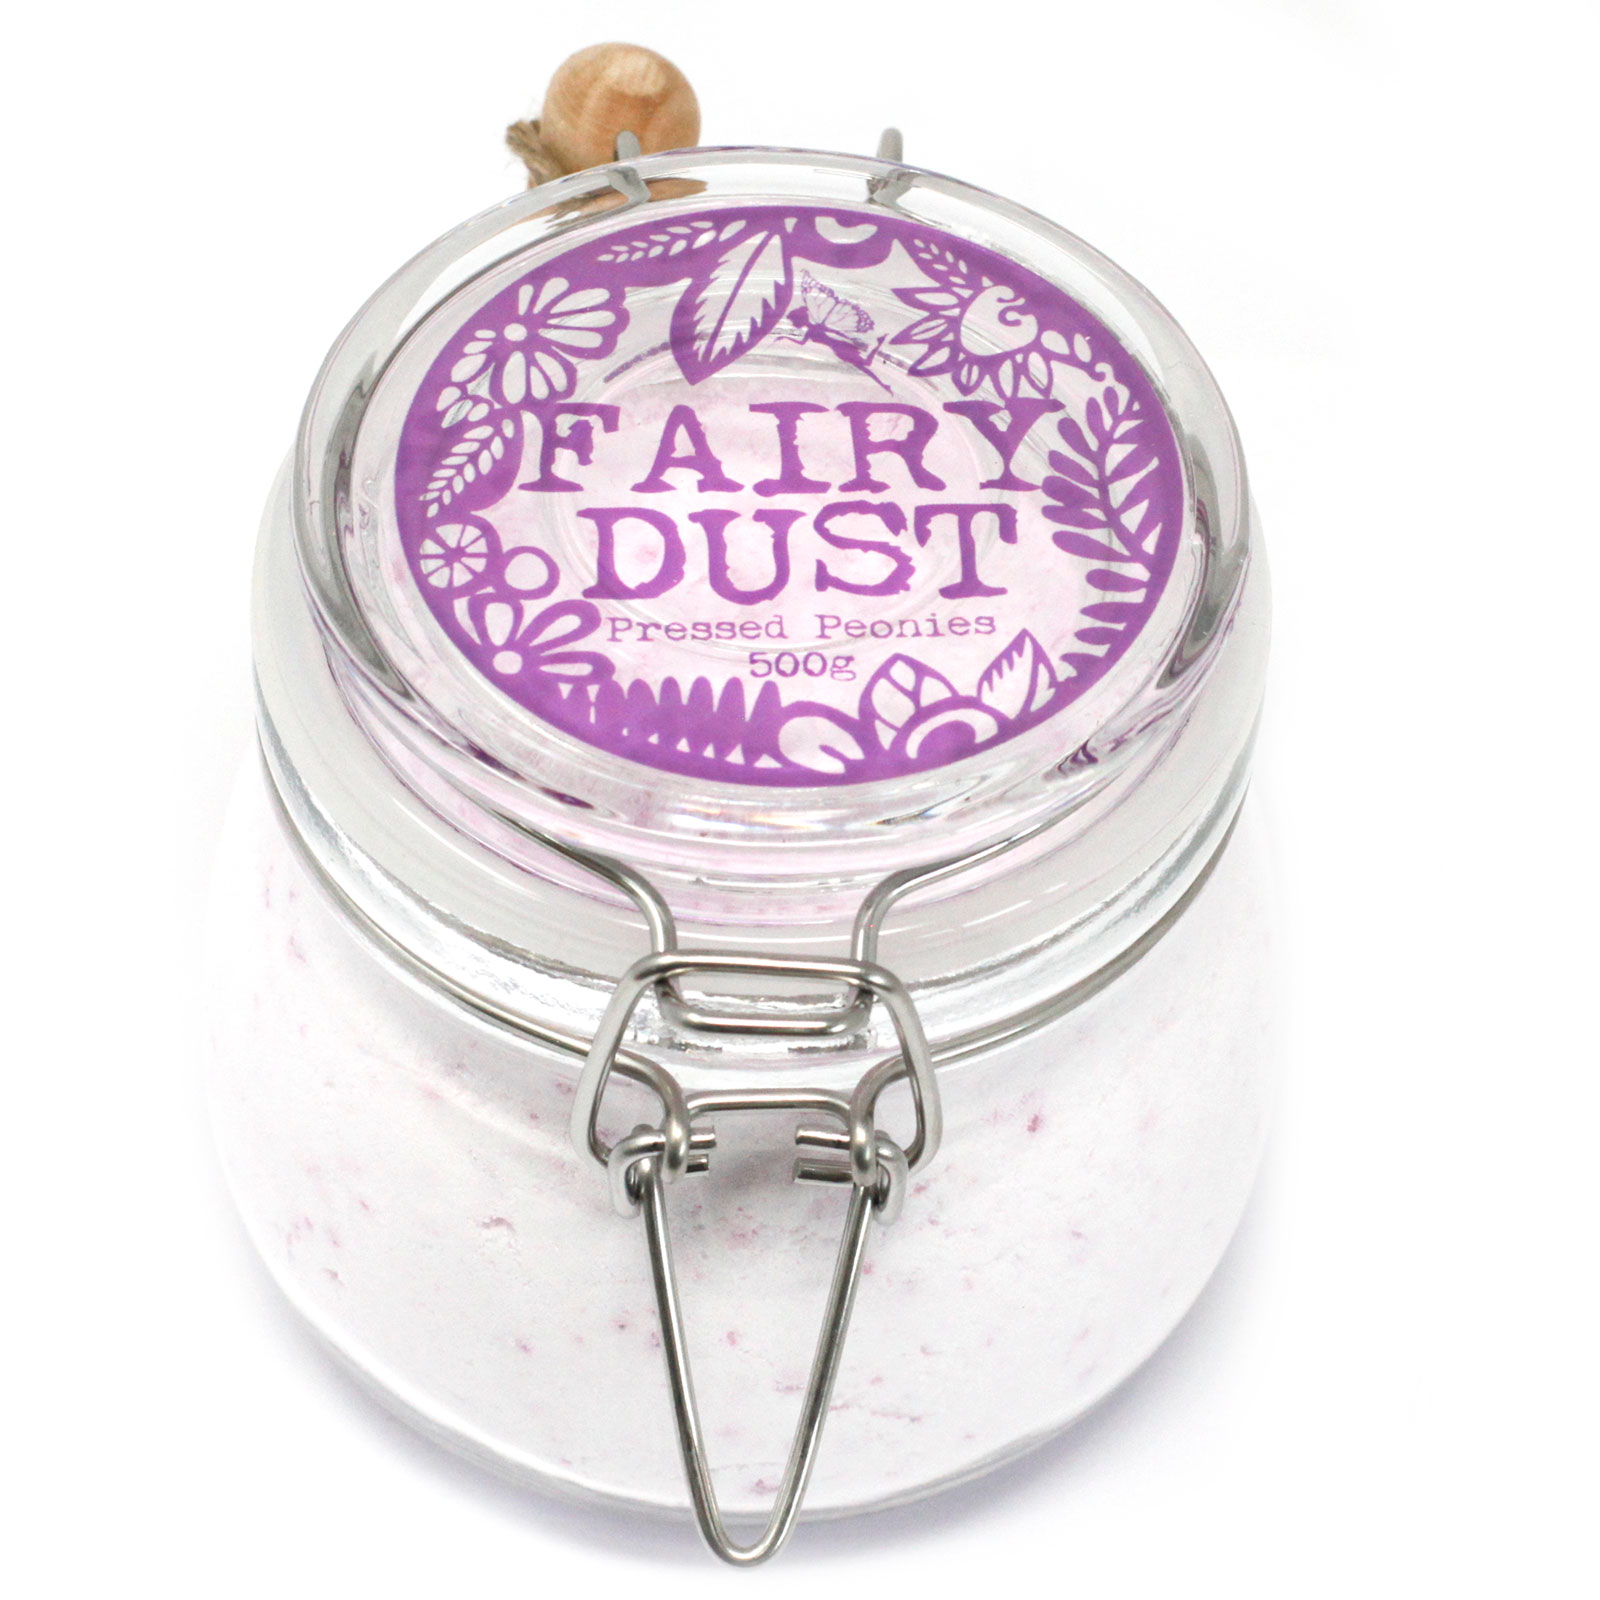 A&C Fairy Dust 500g - Pressed Peonies ACFD-04DS